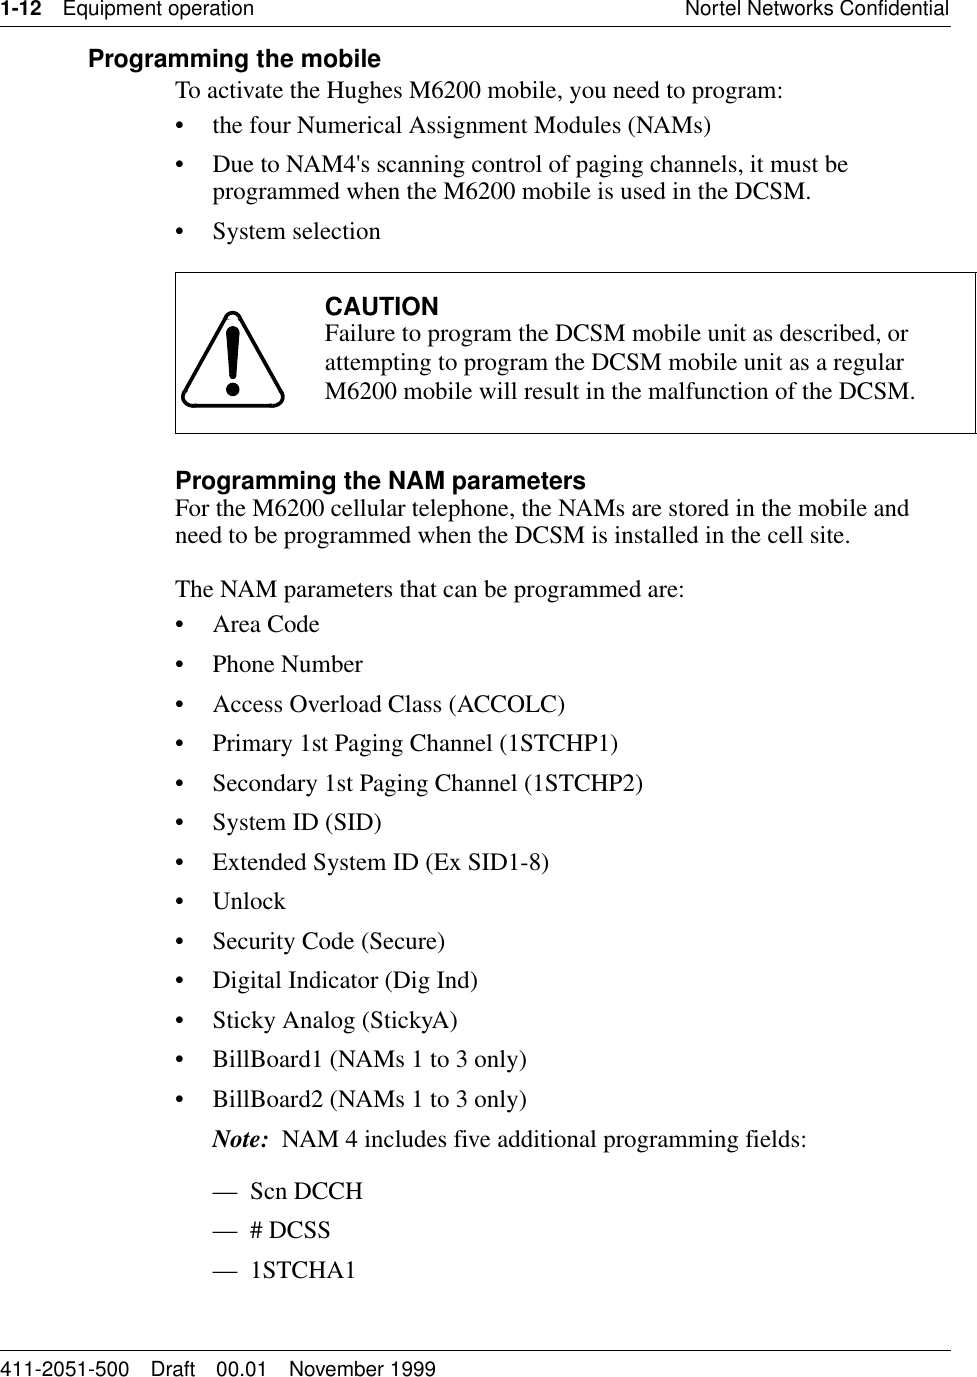 1-12 Equipment operation Nortel Networks Confidential411-2051-500 Draft 00.01 November 1999Programming the mobileTo activate the Hughes M6200 mobile, you need to program:• the four Numerical Assignment Modules (NAMs)• Due to NAM4&apos;s scanning control of paging channels, it must be programmed when the M6200 mobile is used in the DCSM.• System selectionProgramming the NAM parametersFor the M6200 cellular telephone, the NAMs are stored in the mobile and need to be programmed when the DCSM is installed in the cell site.The NAM parameters that can be programmed are:•Area Code• Phone Number• Access Overload Class (ACCOLC)• Primary 1st Paging Channel (1STCHP1)• Secondary 1st Paging Channel (1STCHP2)• System ID (SID)• Extended System ID (Ex SID1-8)• Unlock• Security Code (Secure)• Digital Indicator (Dig Ind)• Sticky Analog (StickyA)• BillBoard1 (NAMs 1 to 3 only)• BillBoard2 (NAMs 1 to 3 only)Note:  NAM 4 includes five additional programming fields:—Scn DCCH— # DCSS—1STCHA1CAUTIONFailure to program the DCSM mobile unit as described, or attempting to program the DCSM mobile unit as a regular M6200 mobile will result in the malfunction of the DCSM.